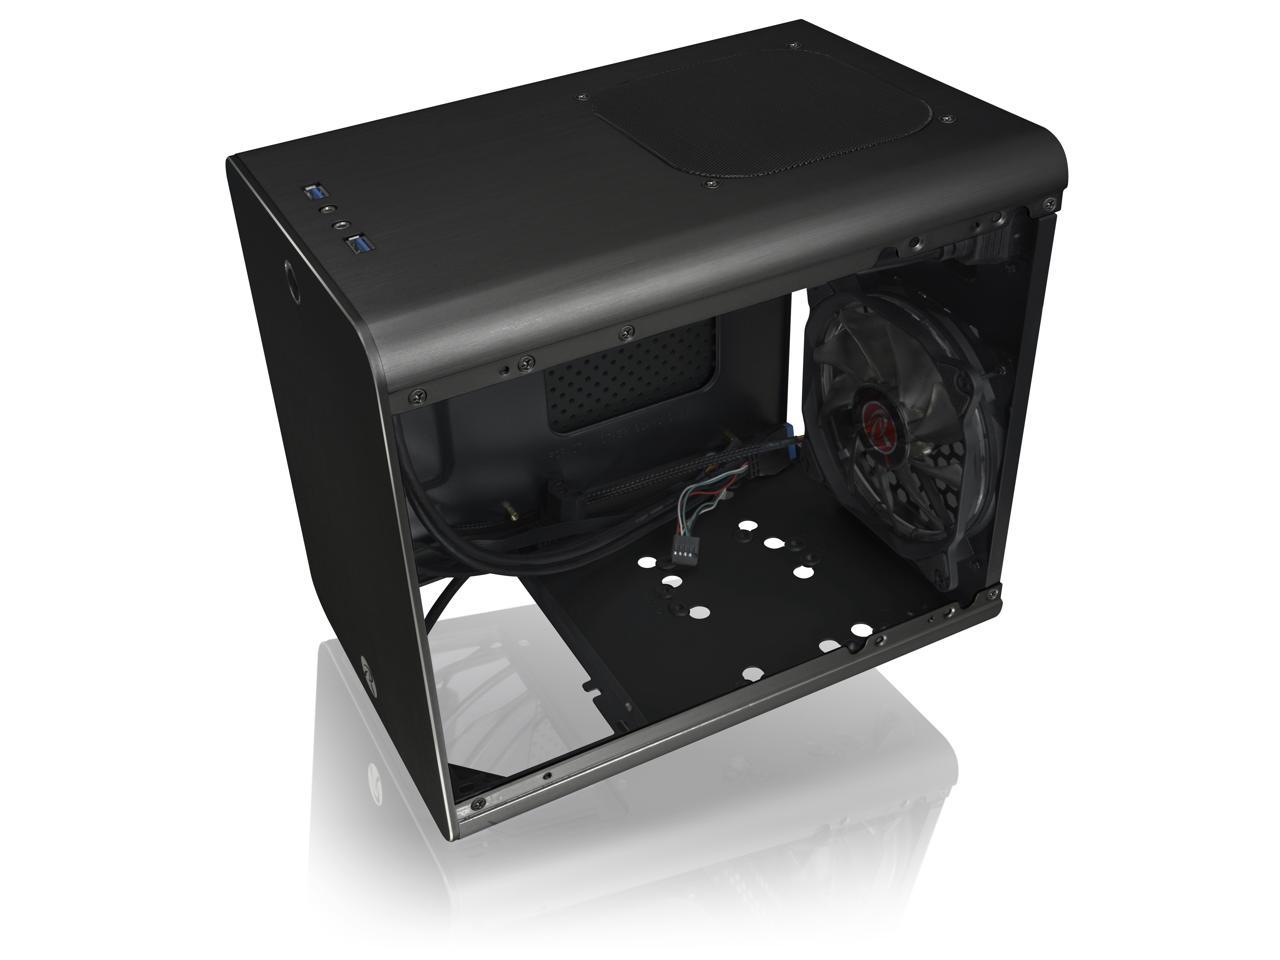 RAIJINTEK METIS PLUS BLACK, a Alu. M-ITX Case, is with one 12025 LED fan at rear, USB 3.0* 2, Ventilate holes at top, Compatible with Standard ATX PSU, 170mm VGA Card length, 160mm CPU Cooler heigth.